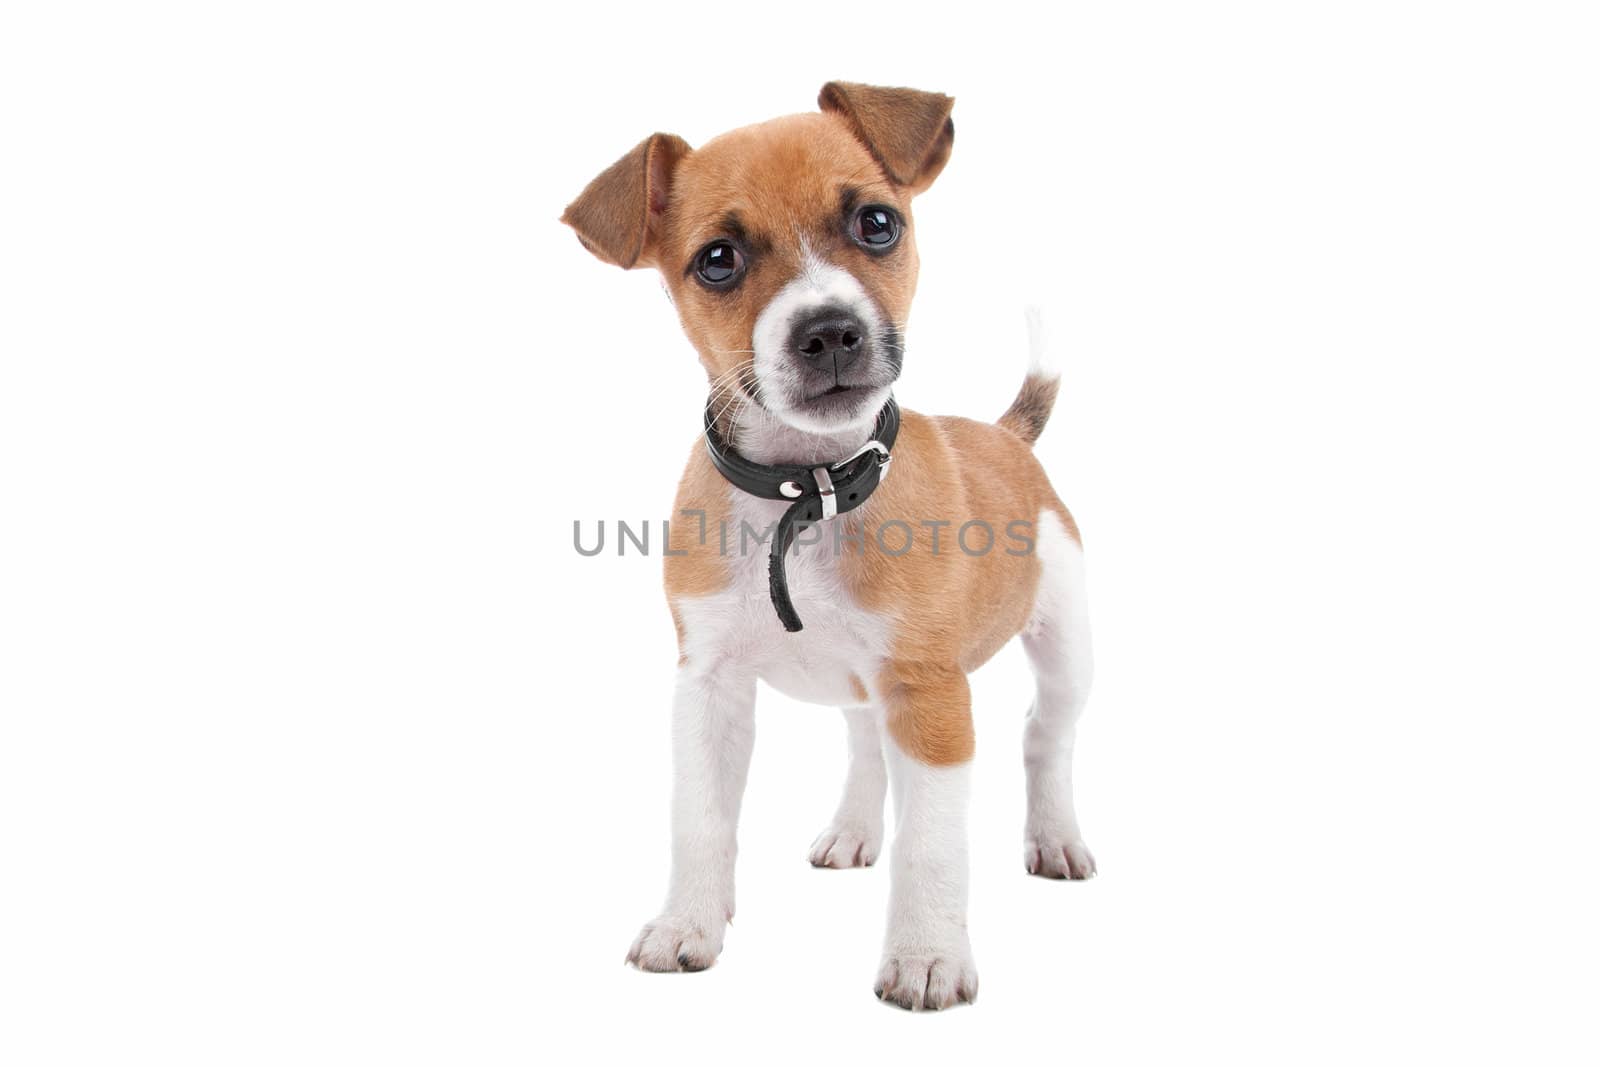 Jack Russel Terrier puppy standing, looking at camera, isolated on a white background